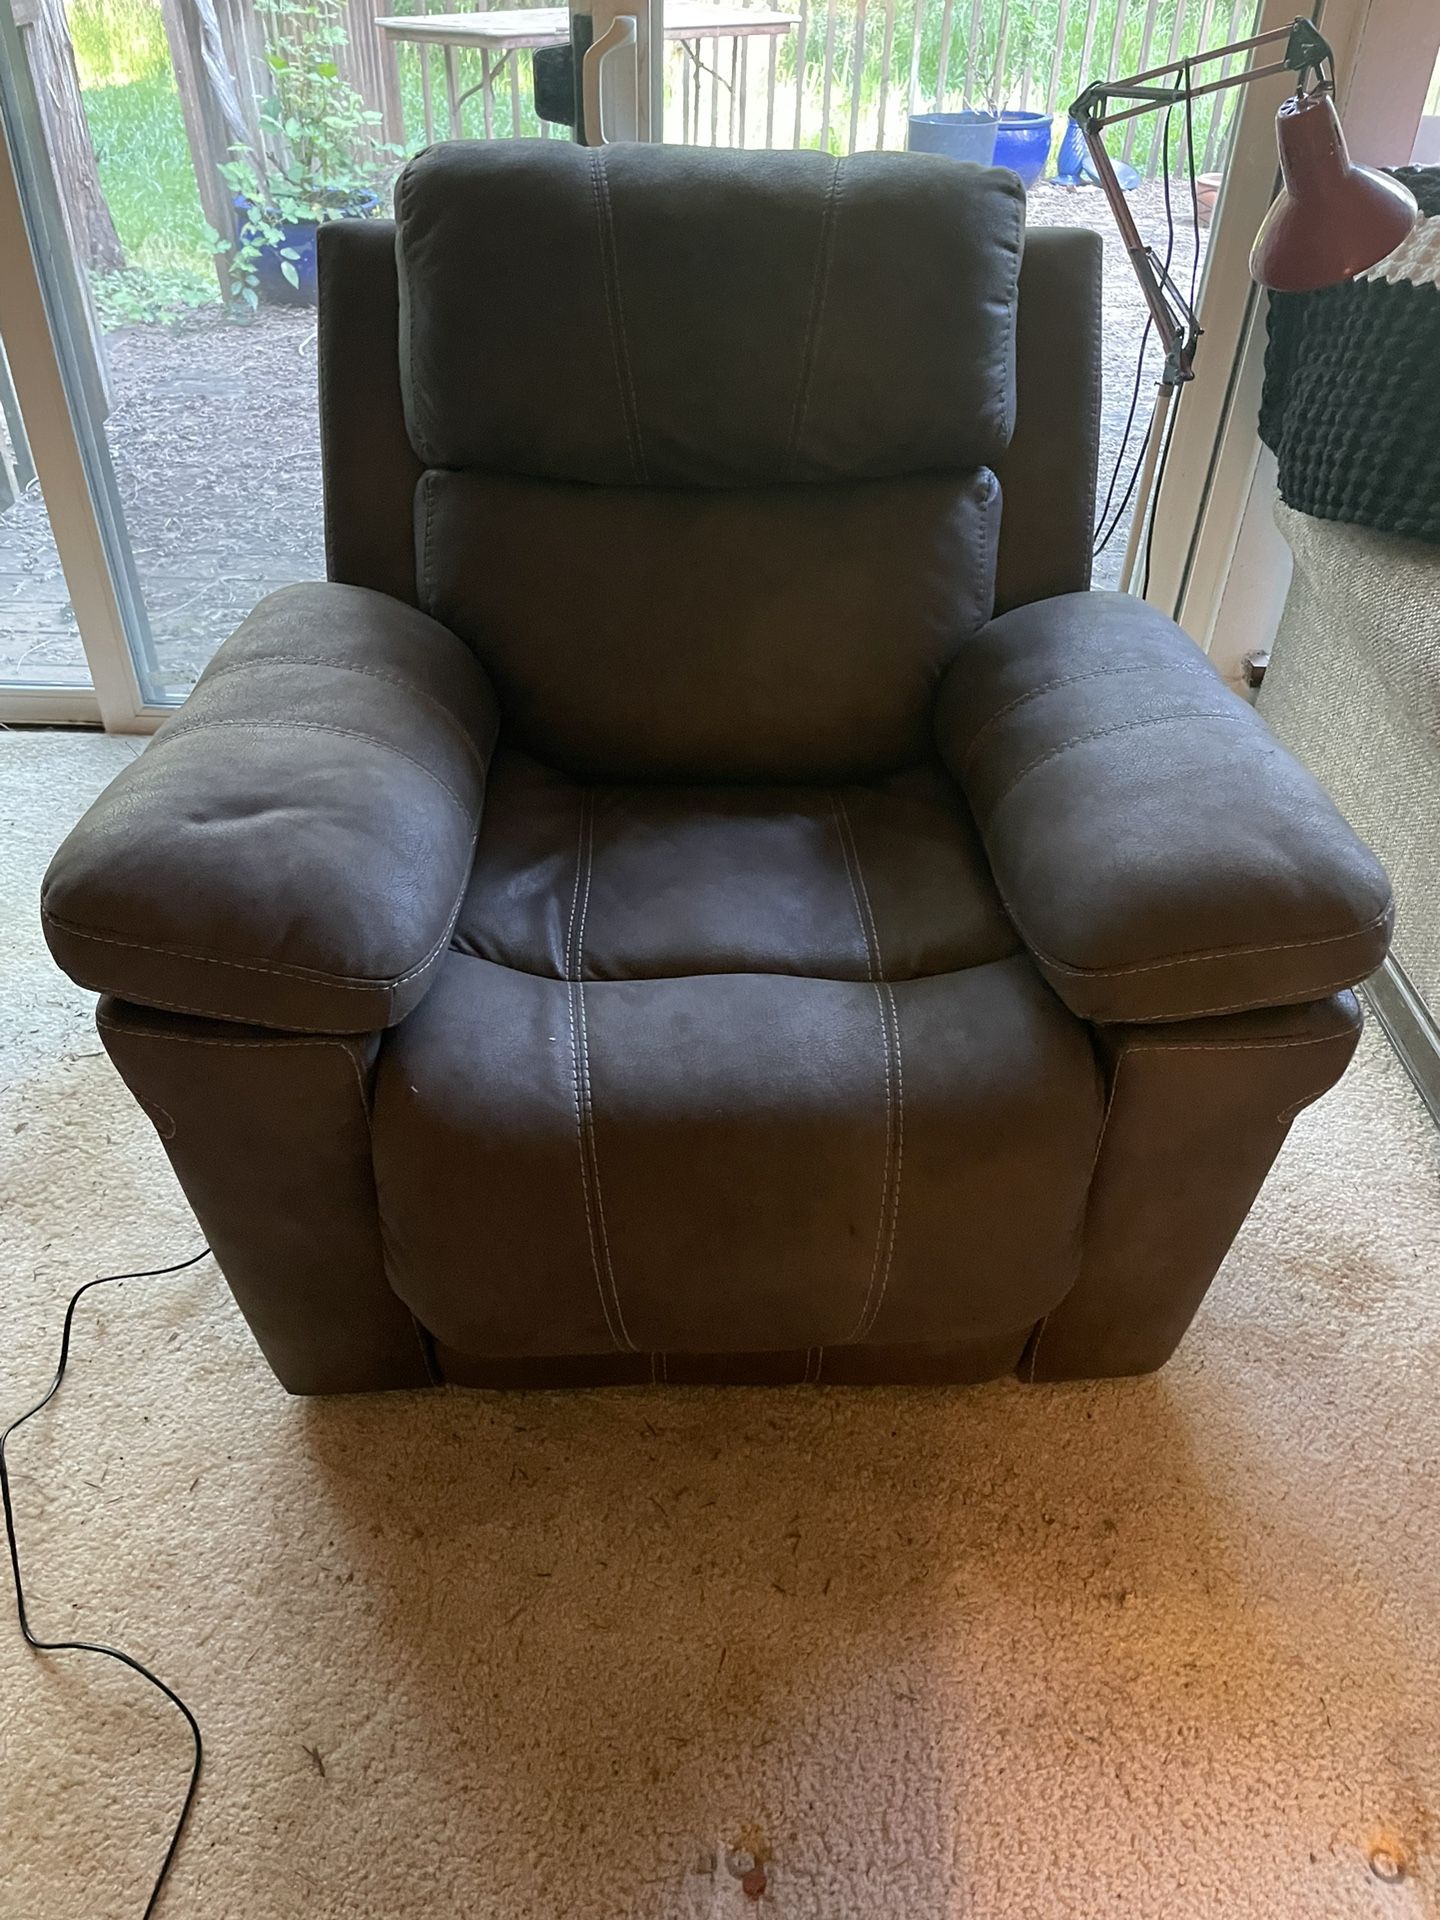 Gray Pleather Electric Recliner 